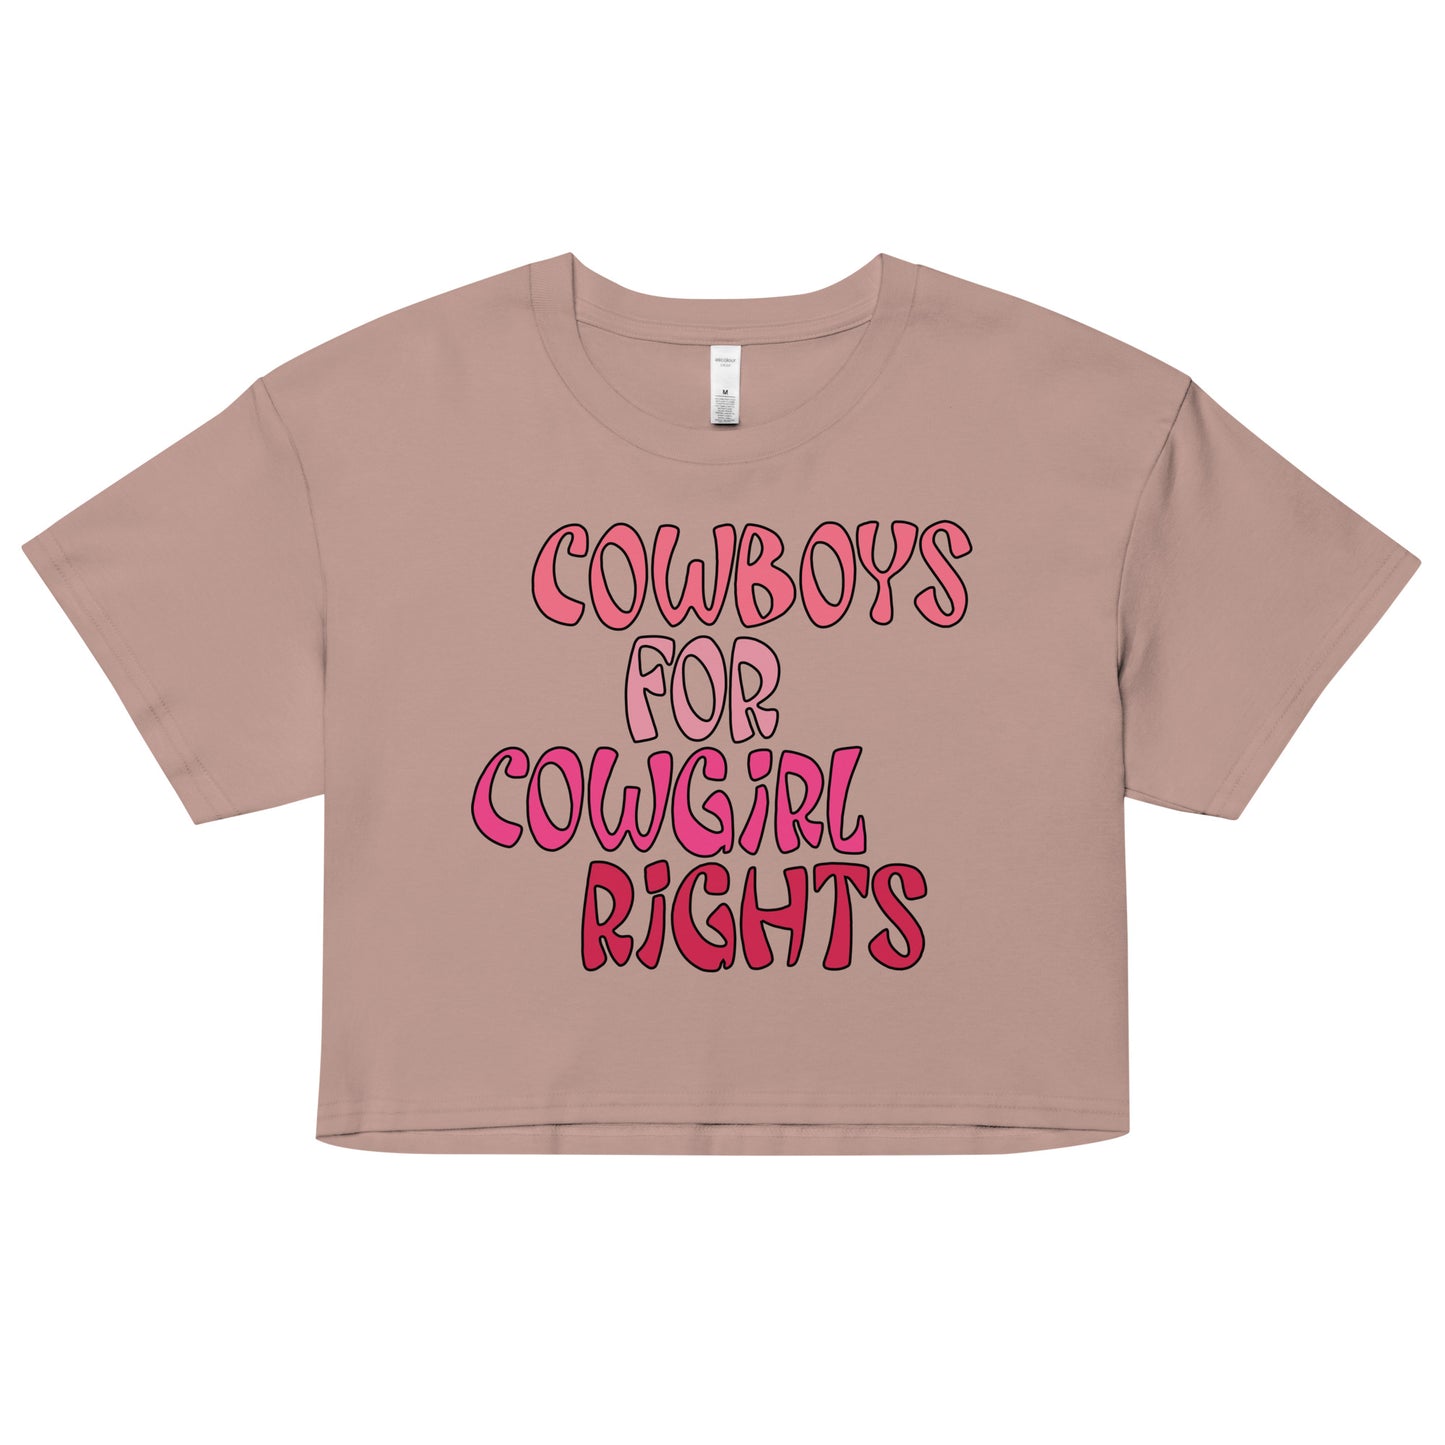 Cowboys For Cowgirl Rights crop top